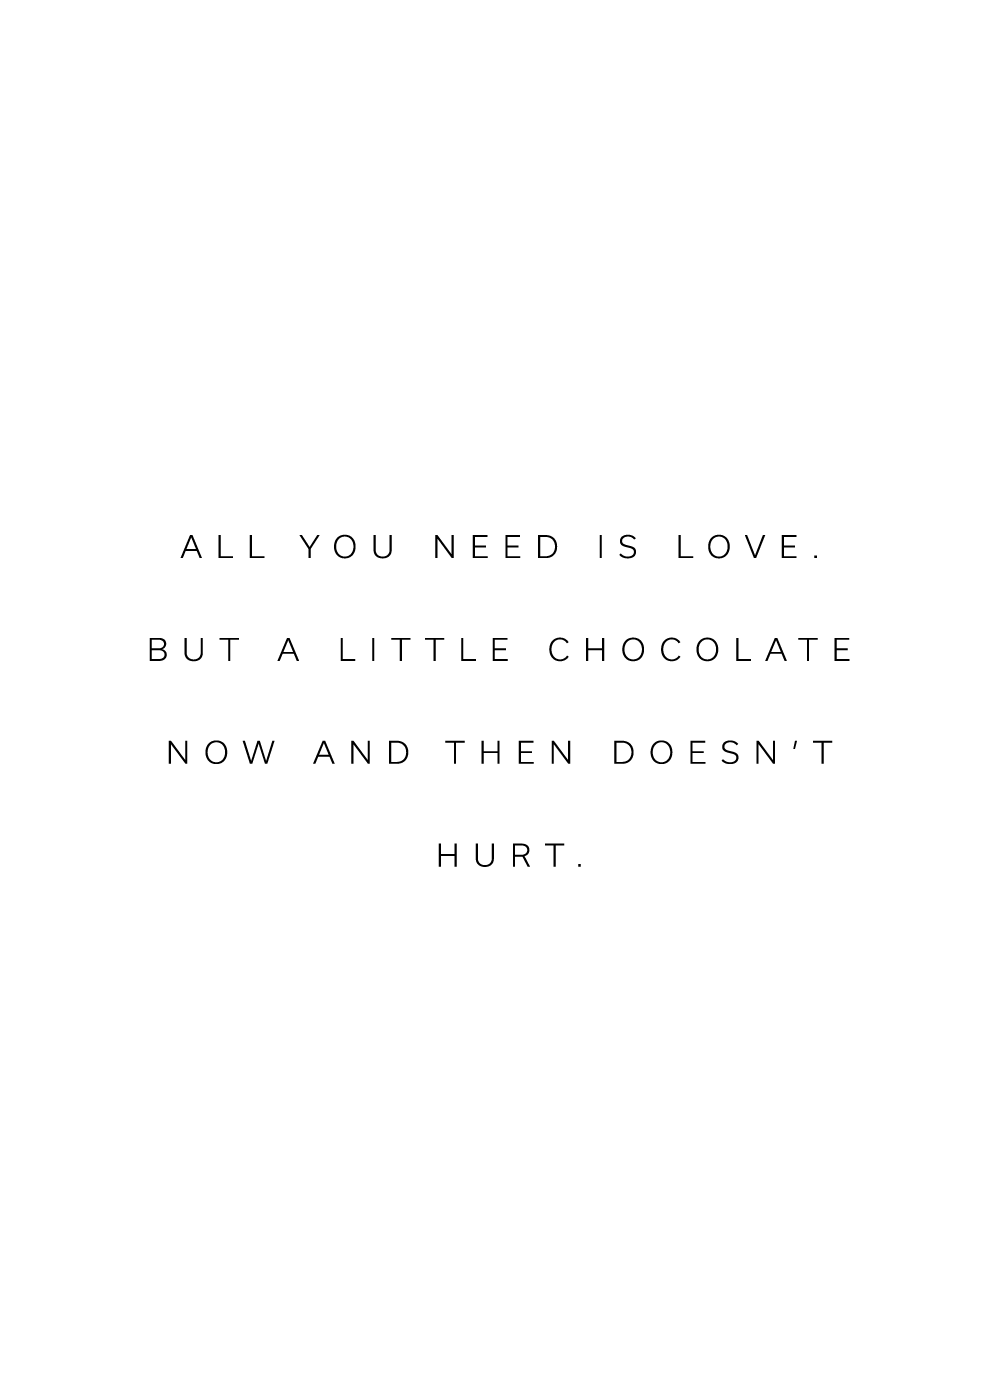 "All you need is love. But a little chocolate now and then doesn't hurt" citatplakat